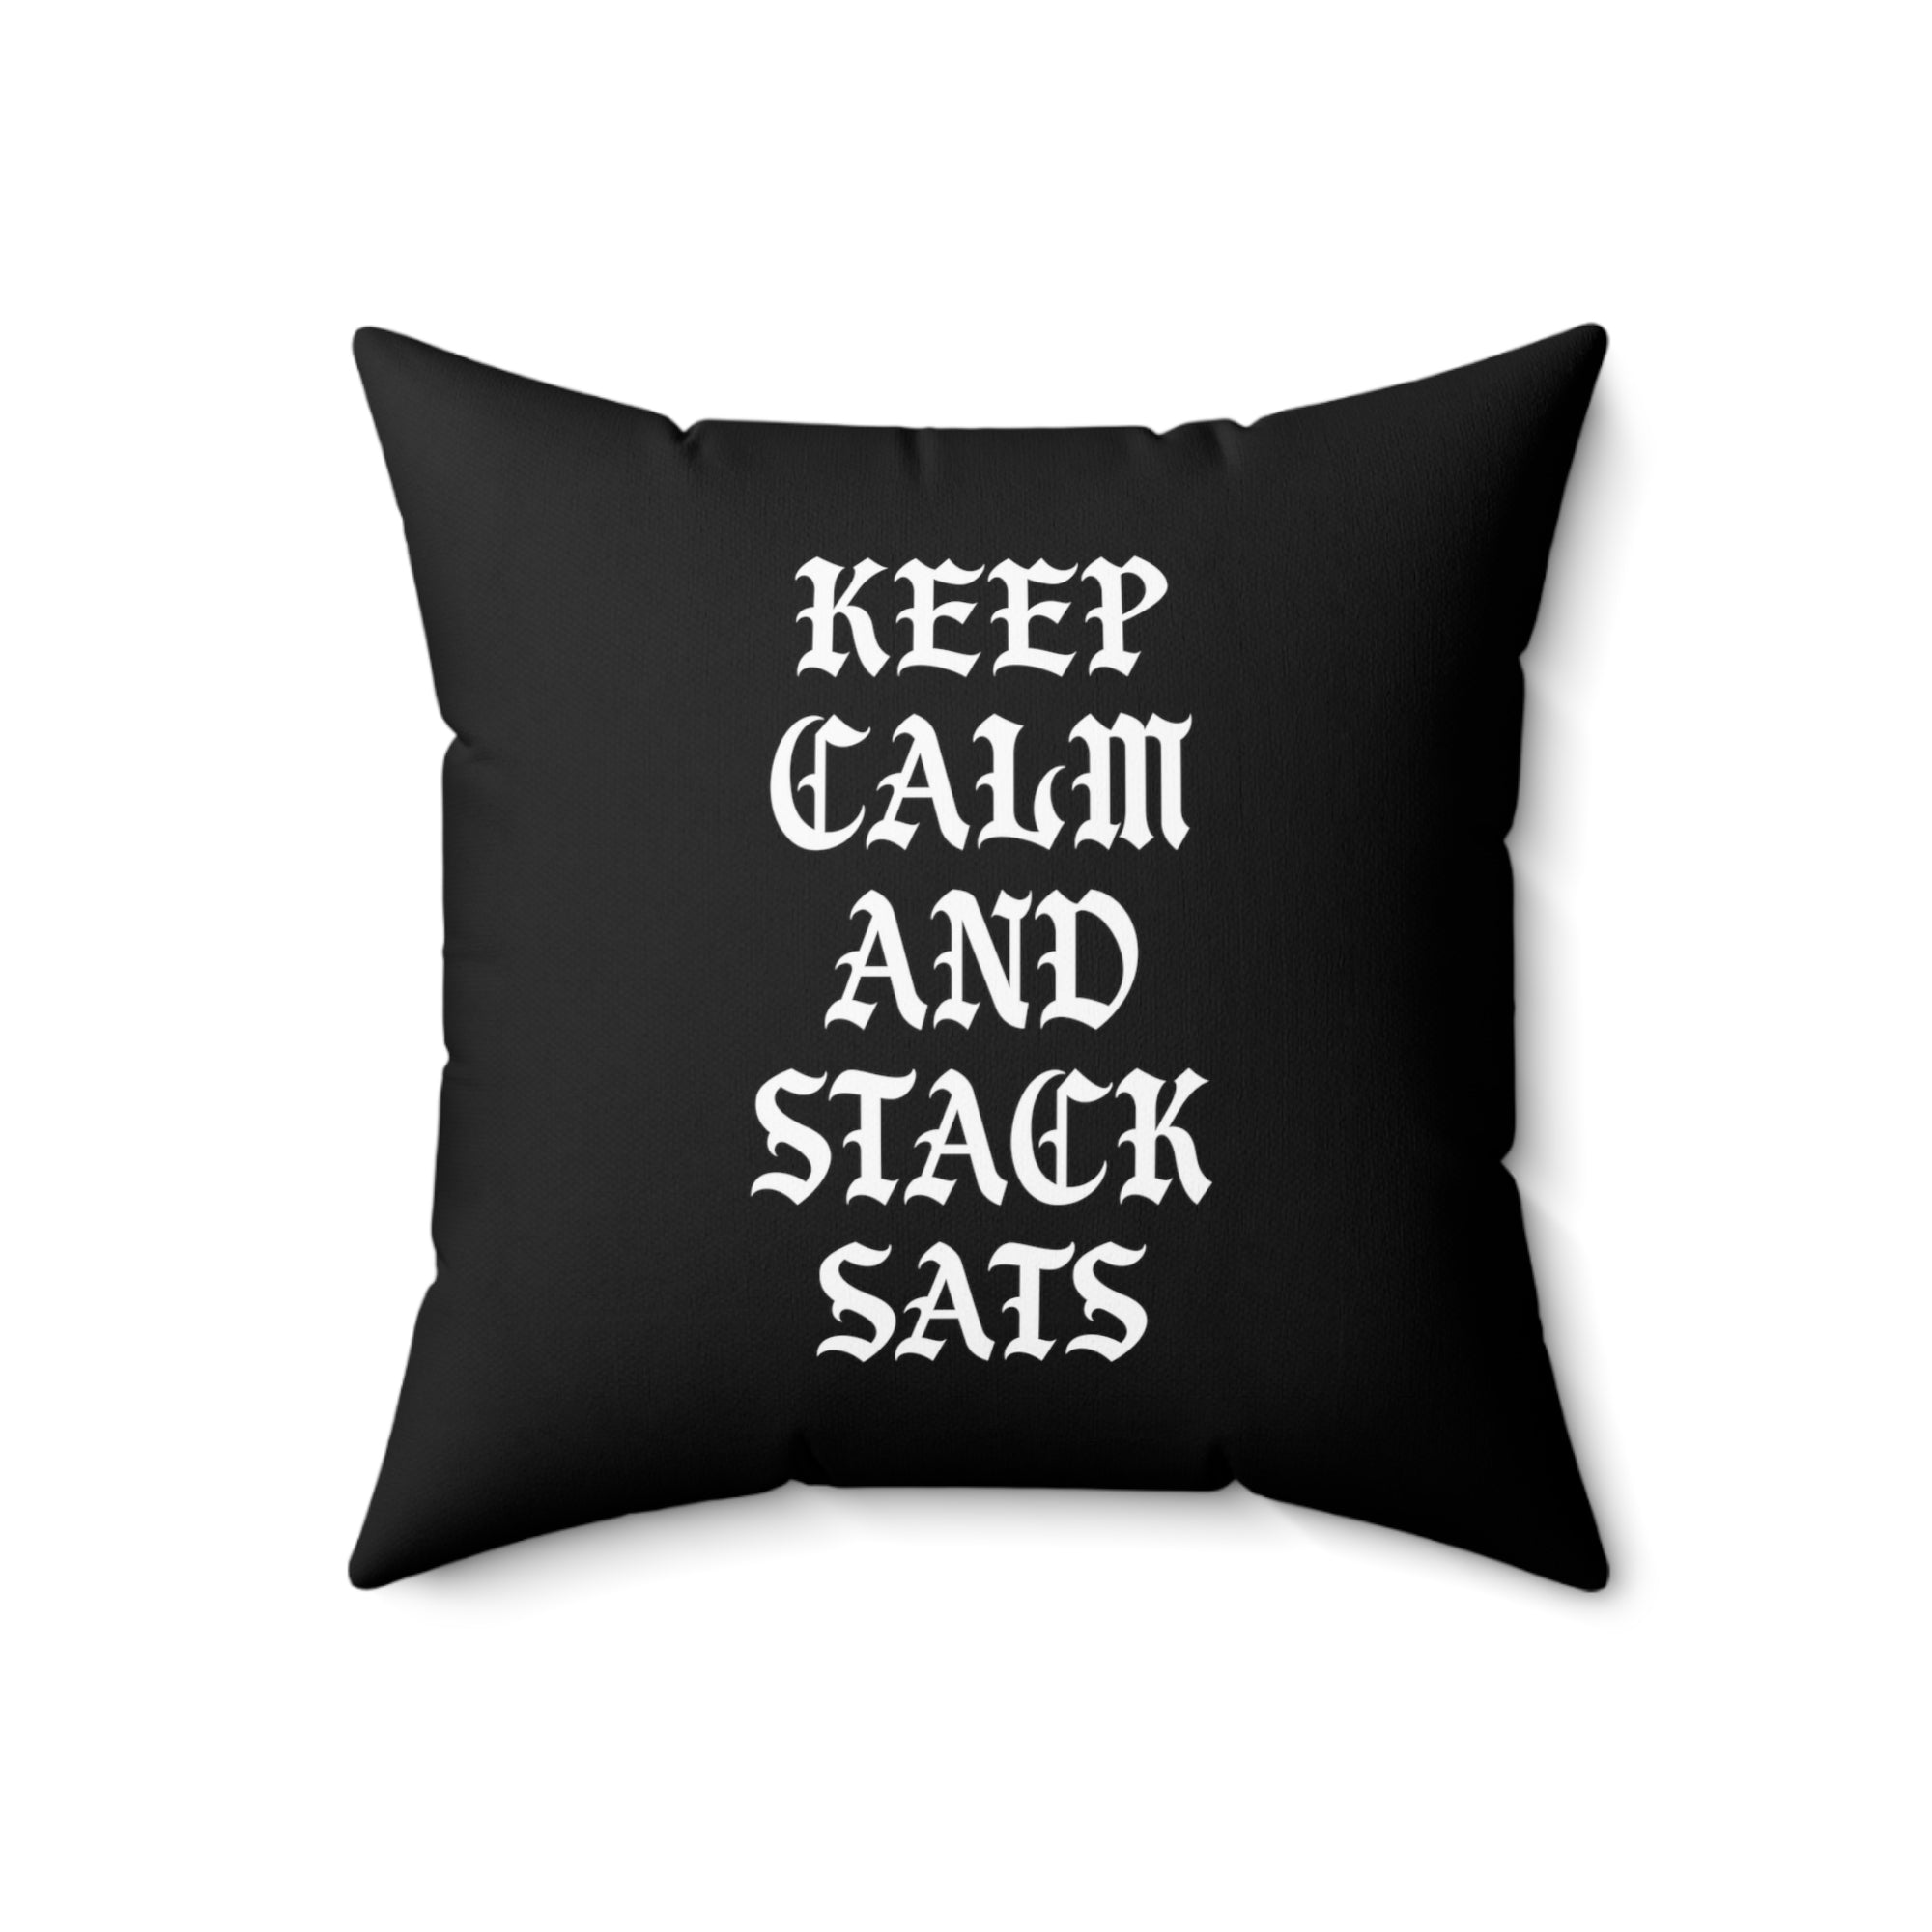 Bitcoin Merchandise - Keep Calm And Stack Sats Pillow (Gothic). Close Up View.